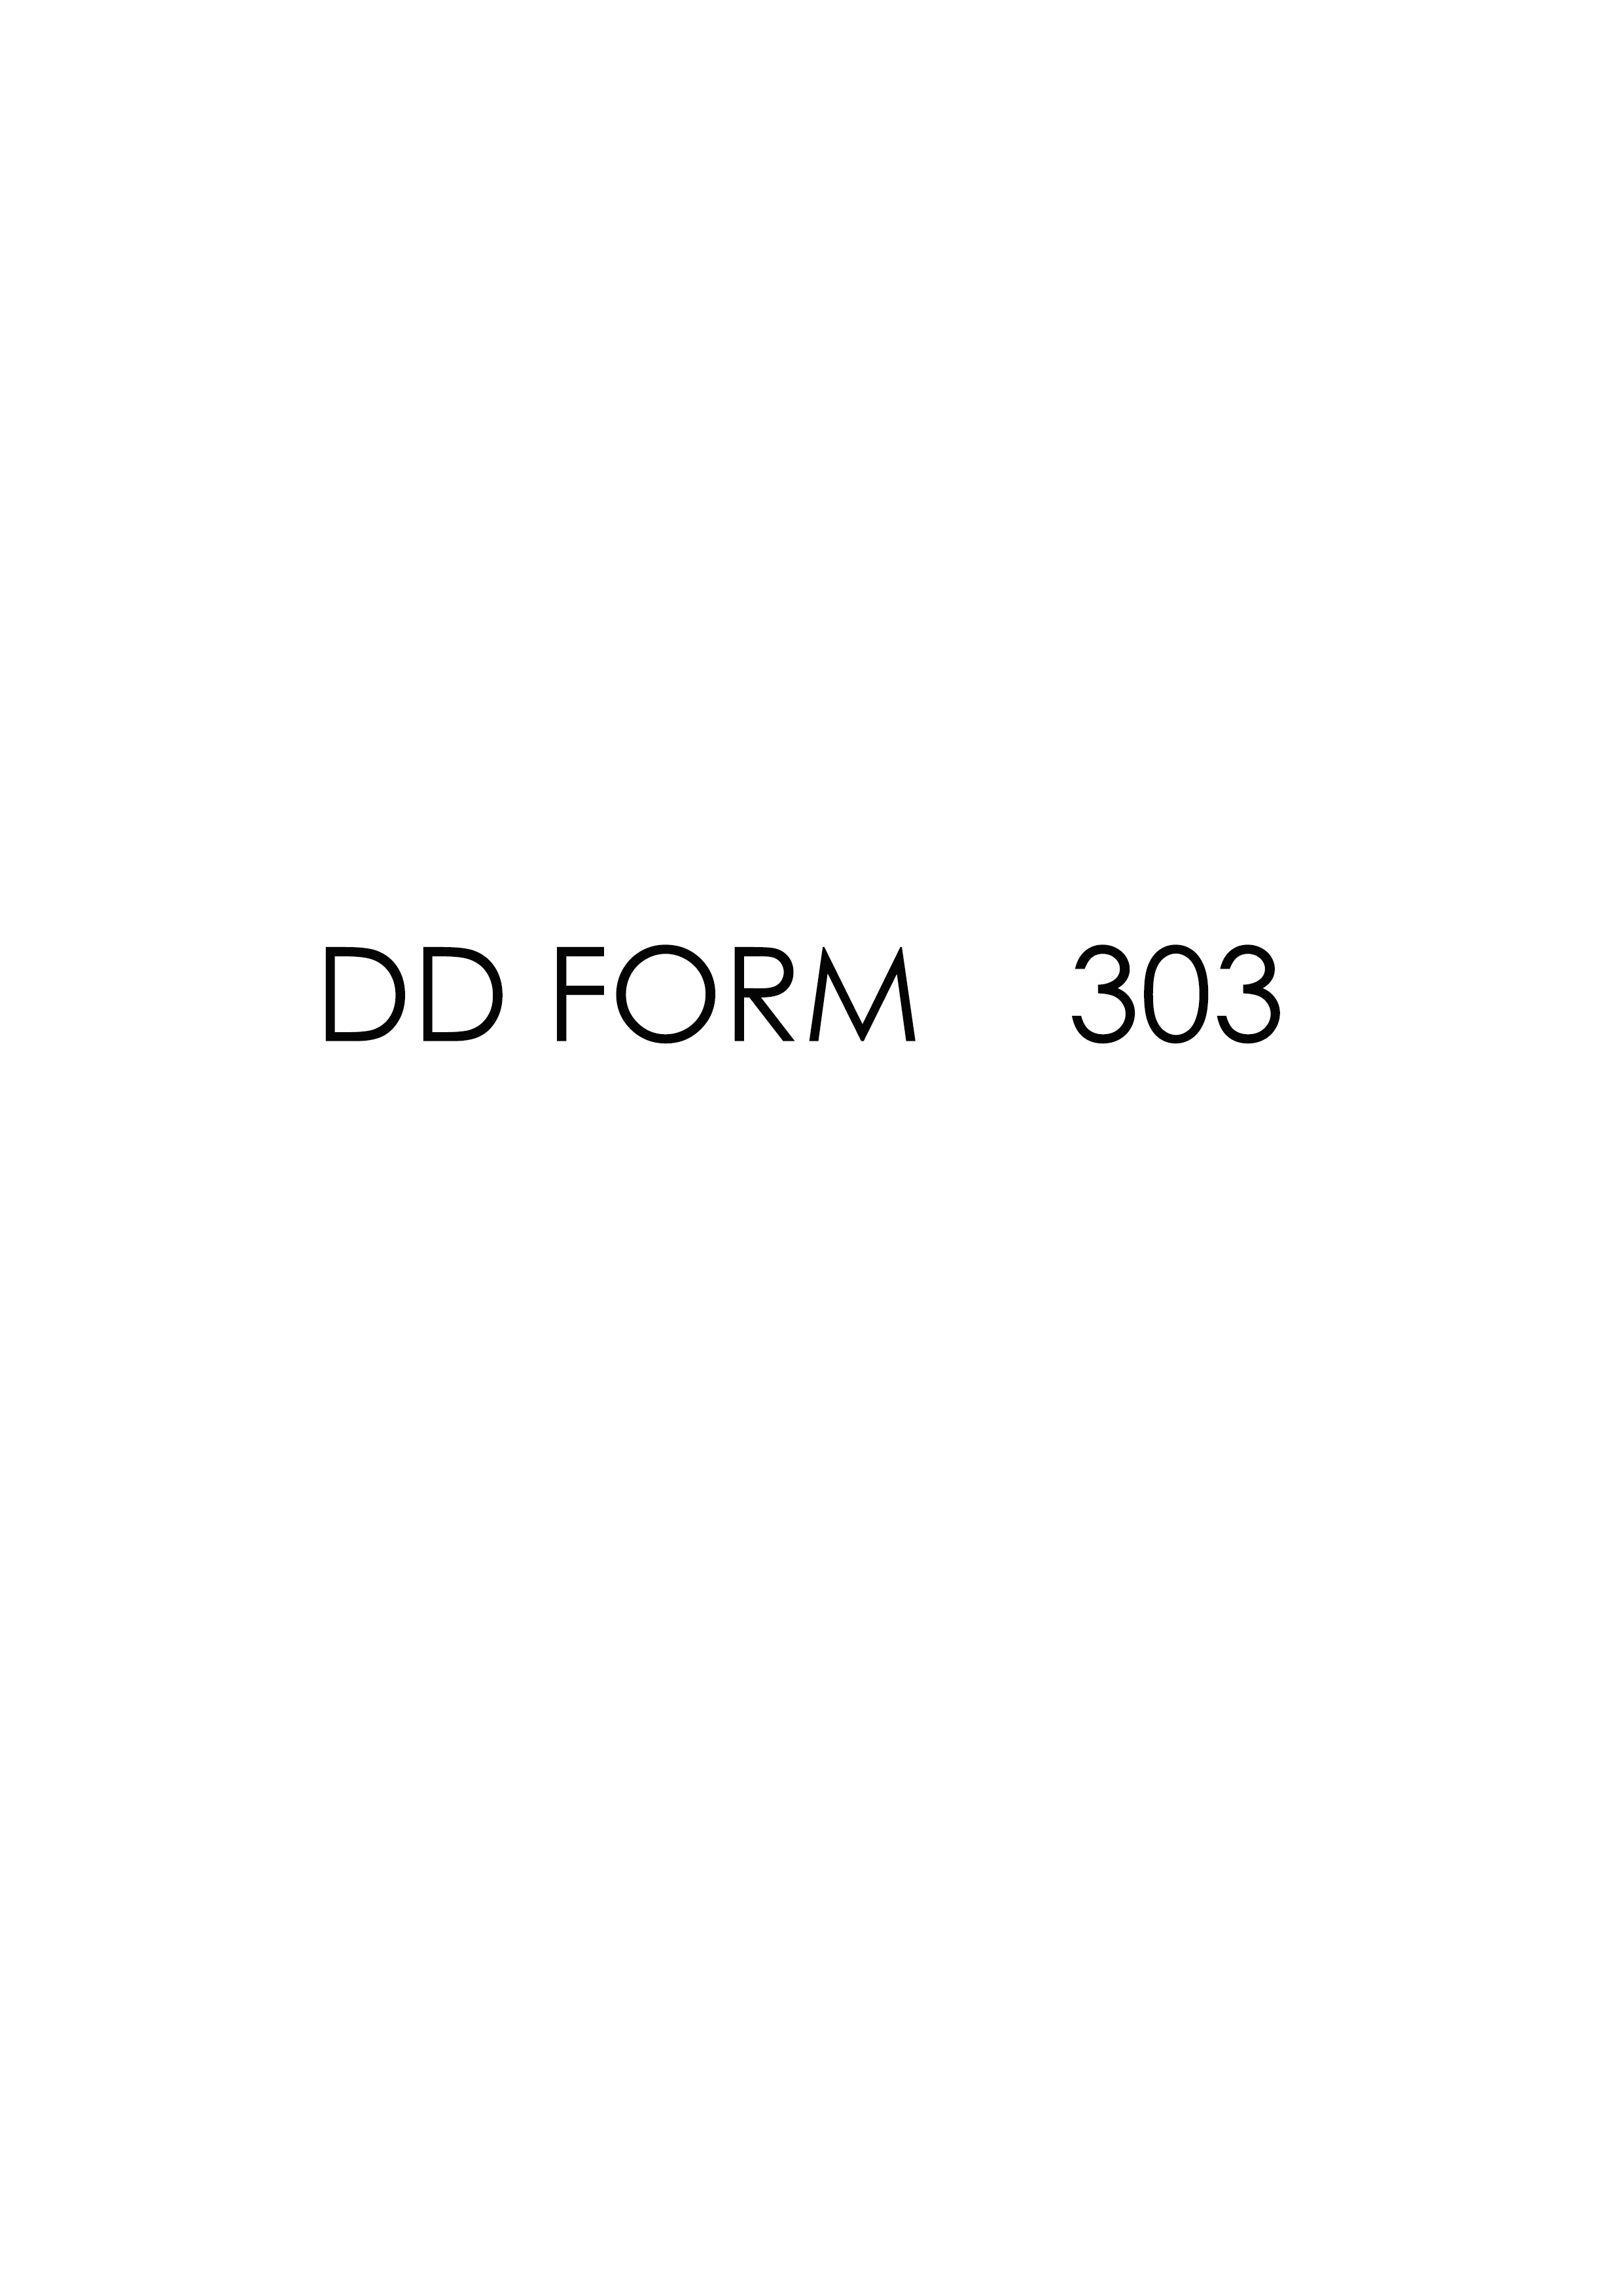 Download Fillable dd Form 303